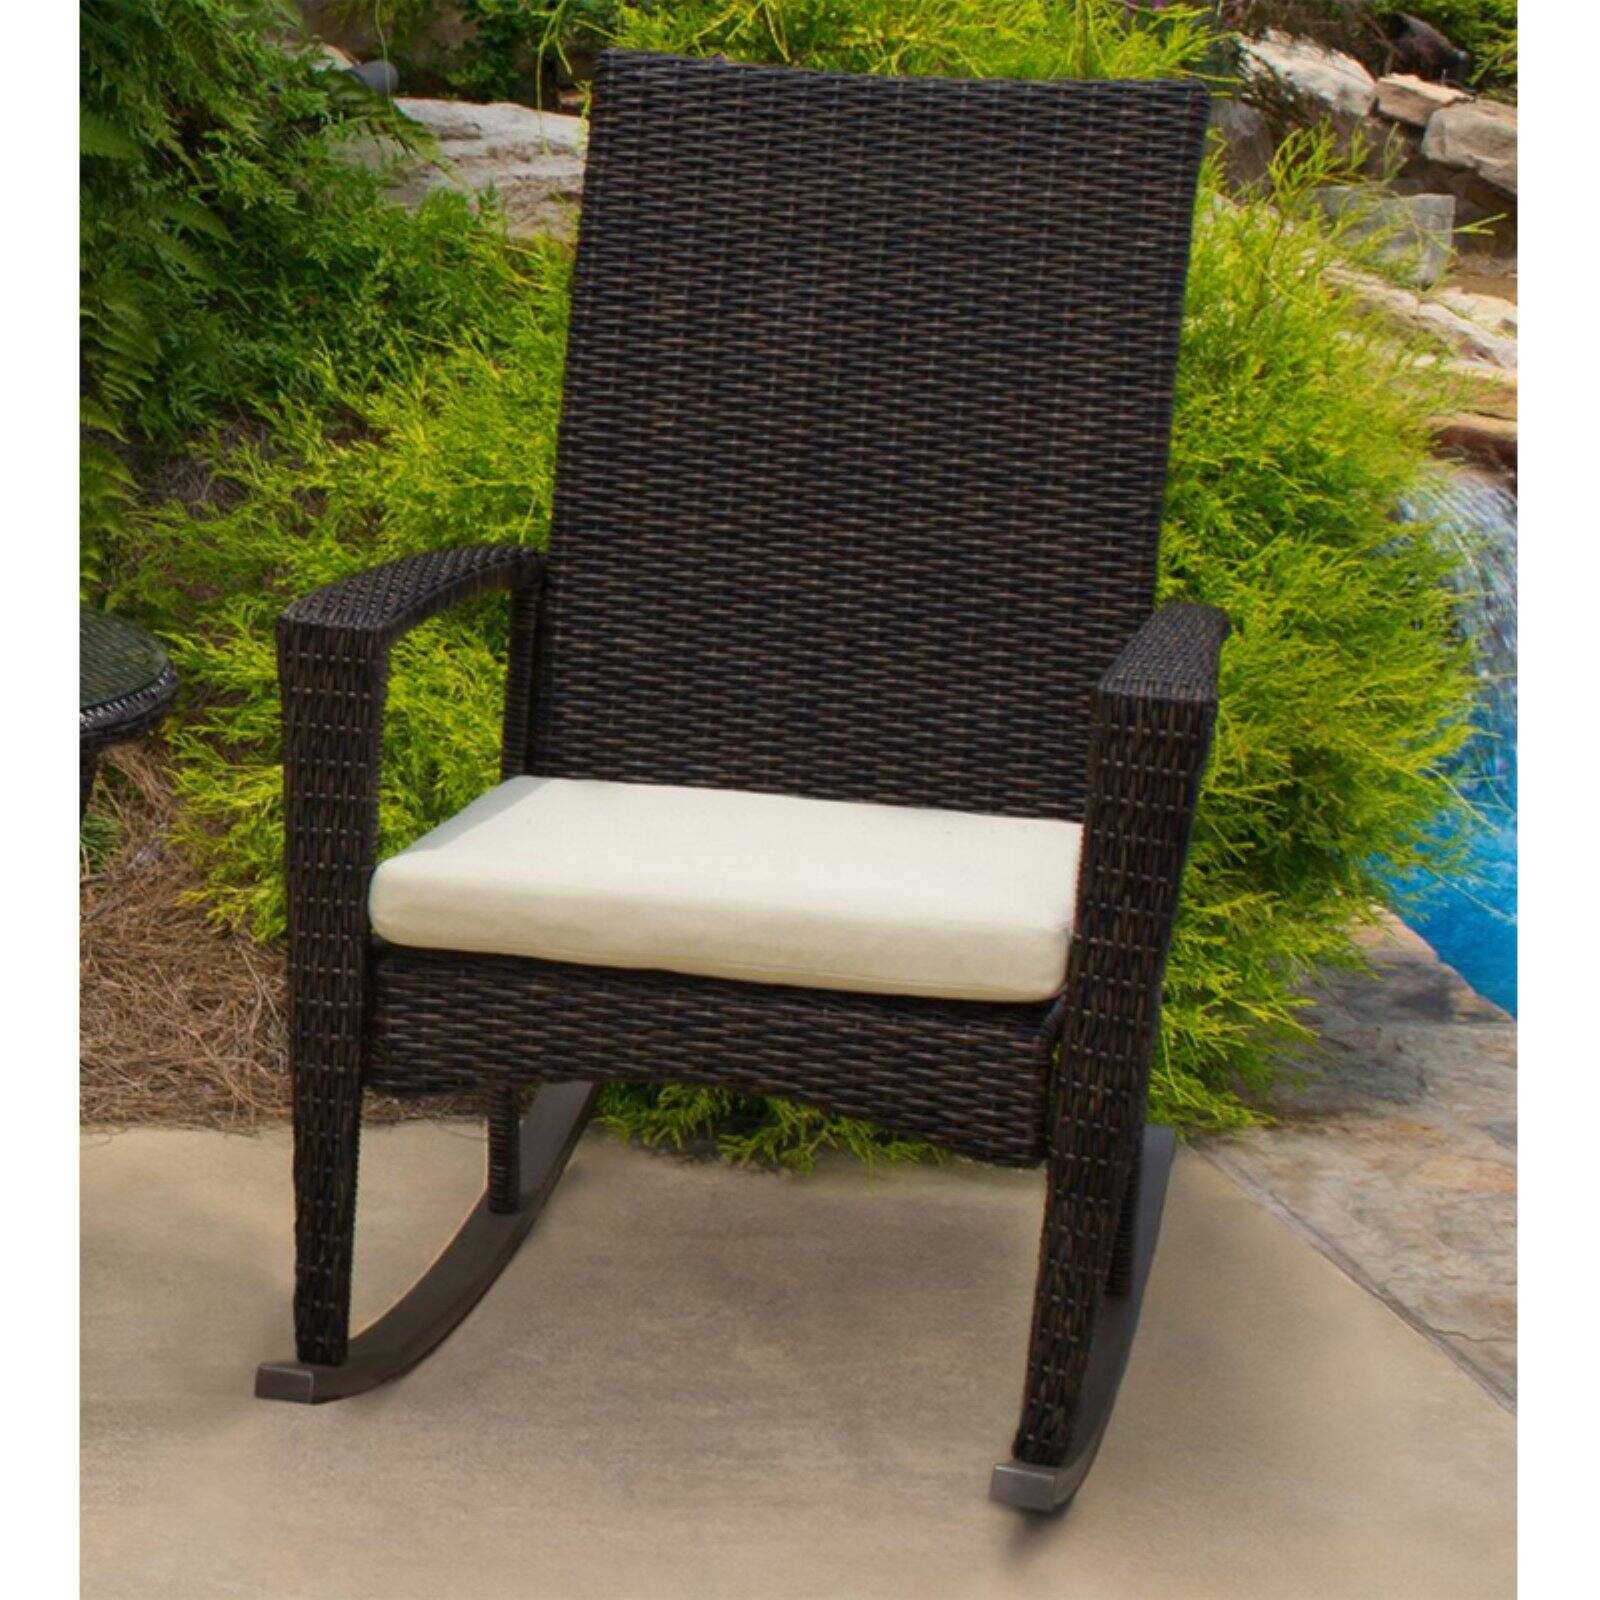 Tortuga Outdoor Bayview Wicker Rocking Chair with Cushion - image 1 of 11